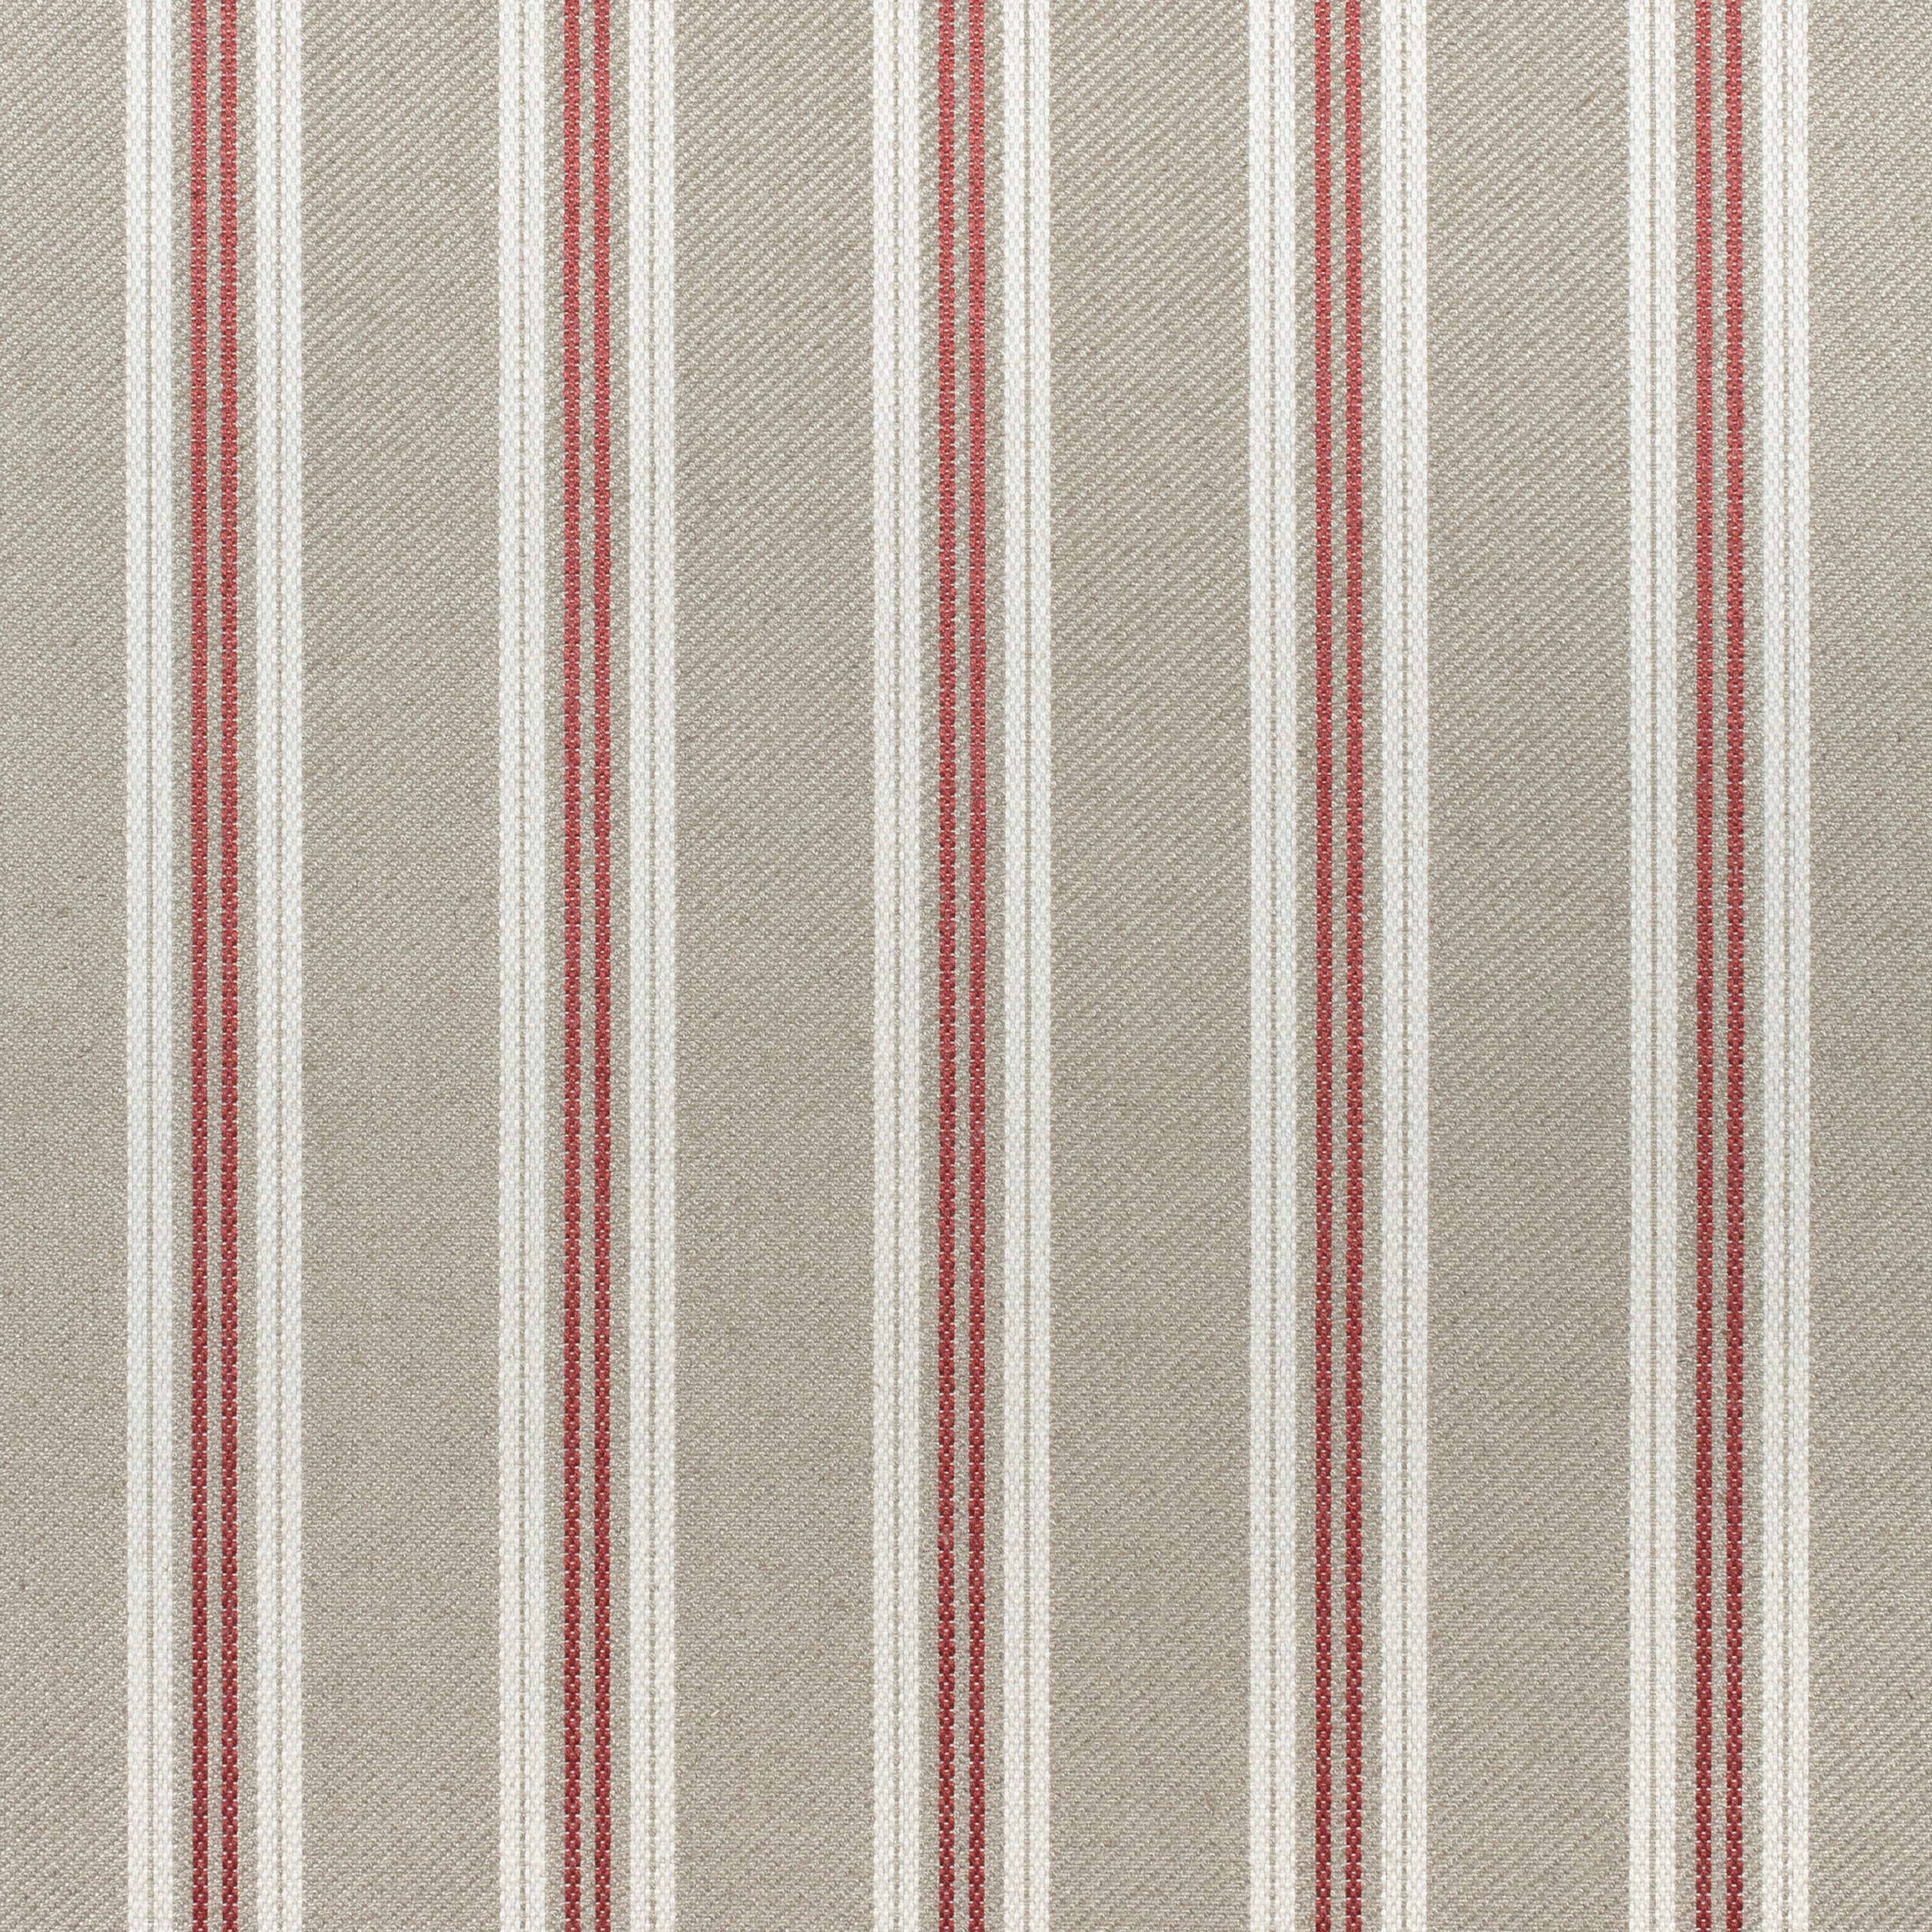 Colonnade Stripe fabric in cardinal color - pattern number W80736 - by Thibaut in the Woven Resource 11: Rialto collection